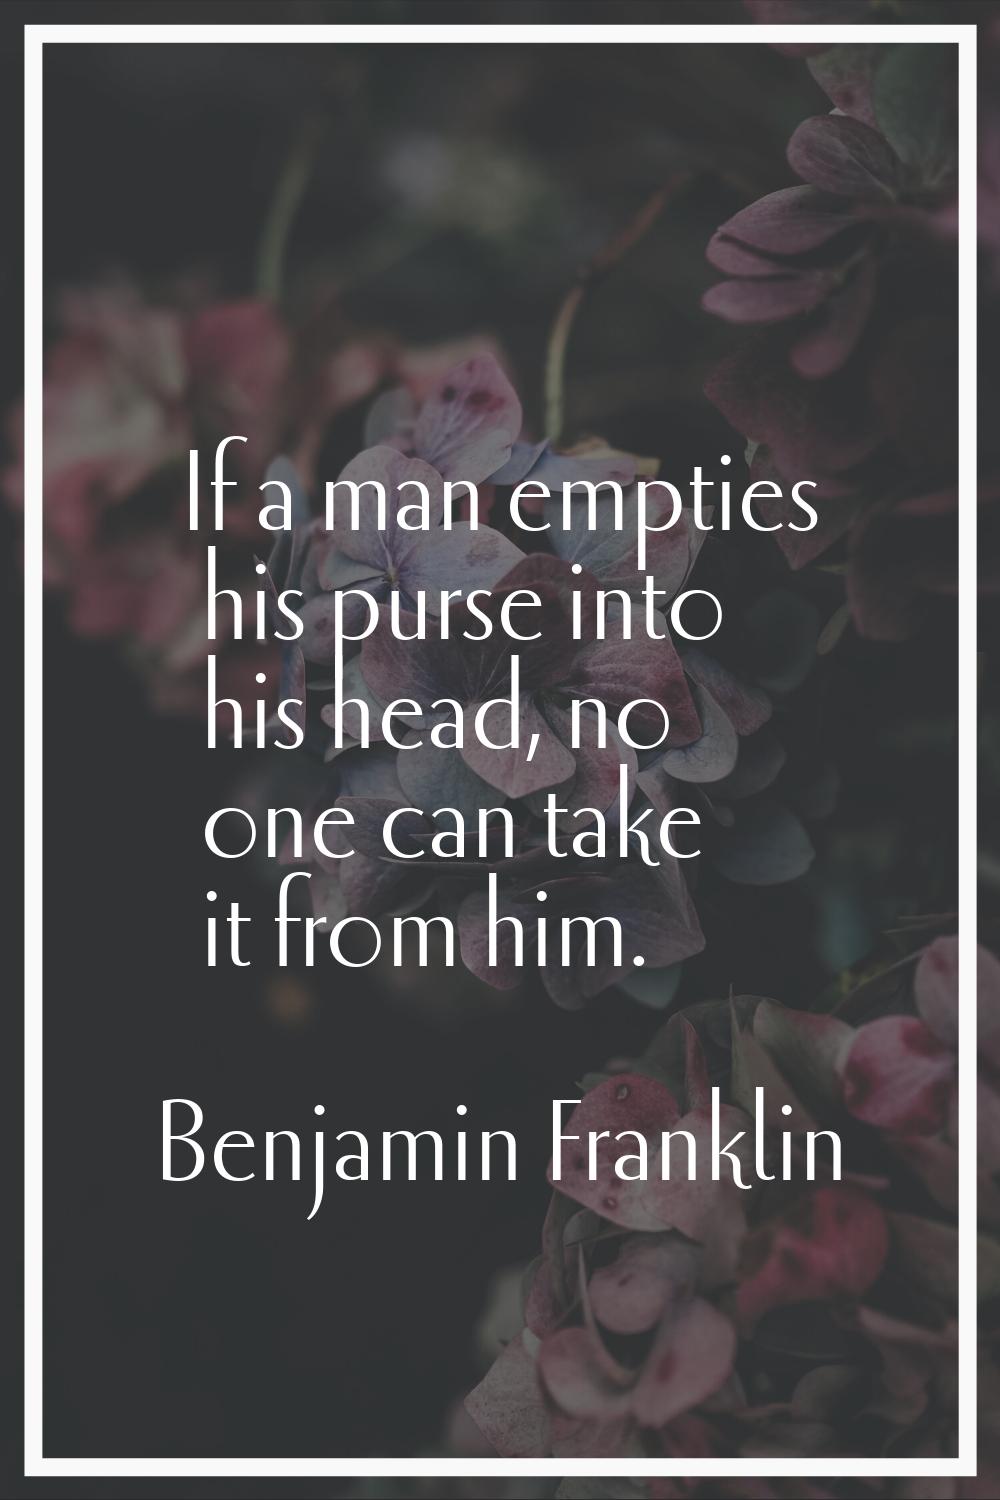 If a man empties his purse into his head, no one can take it from him.